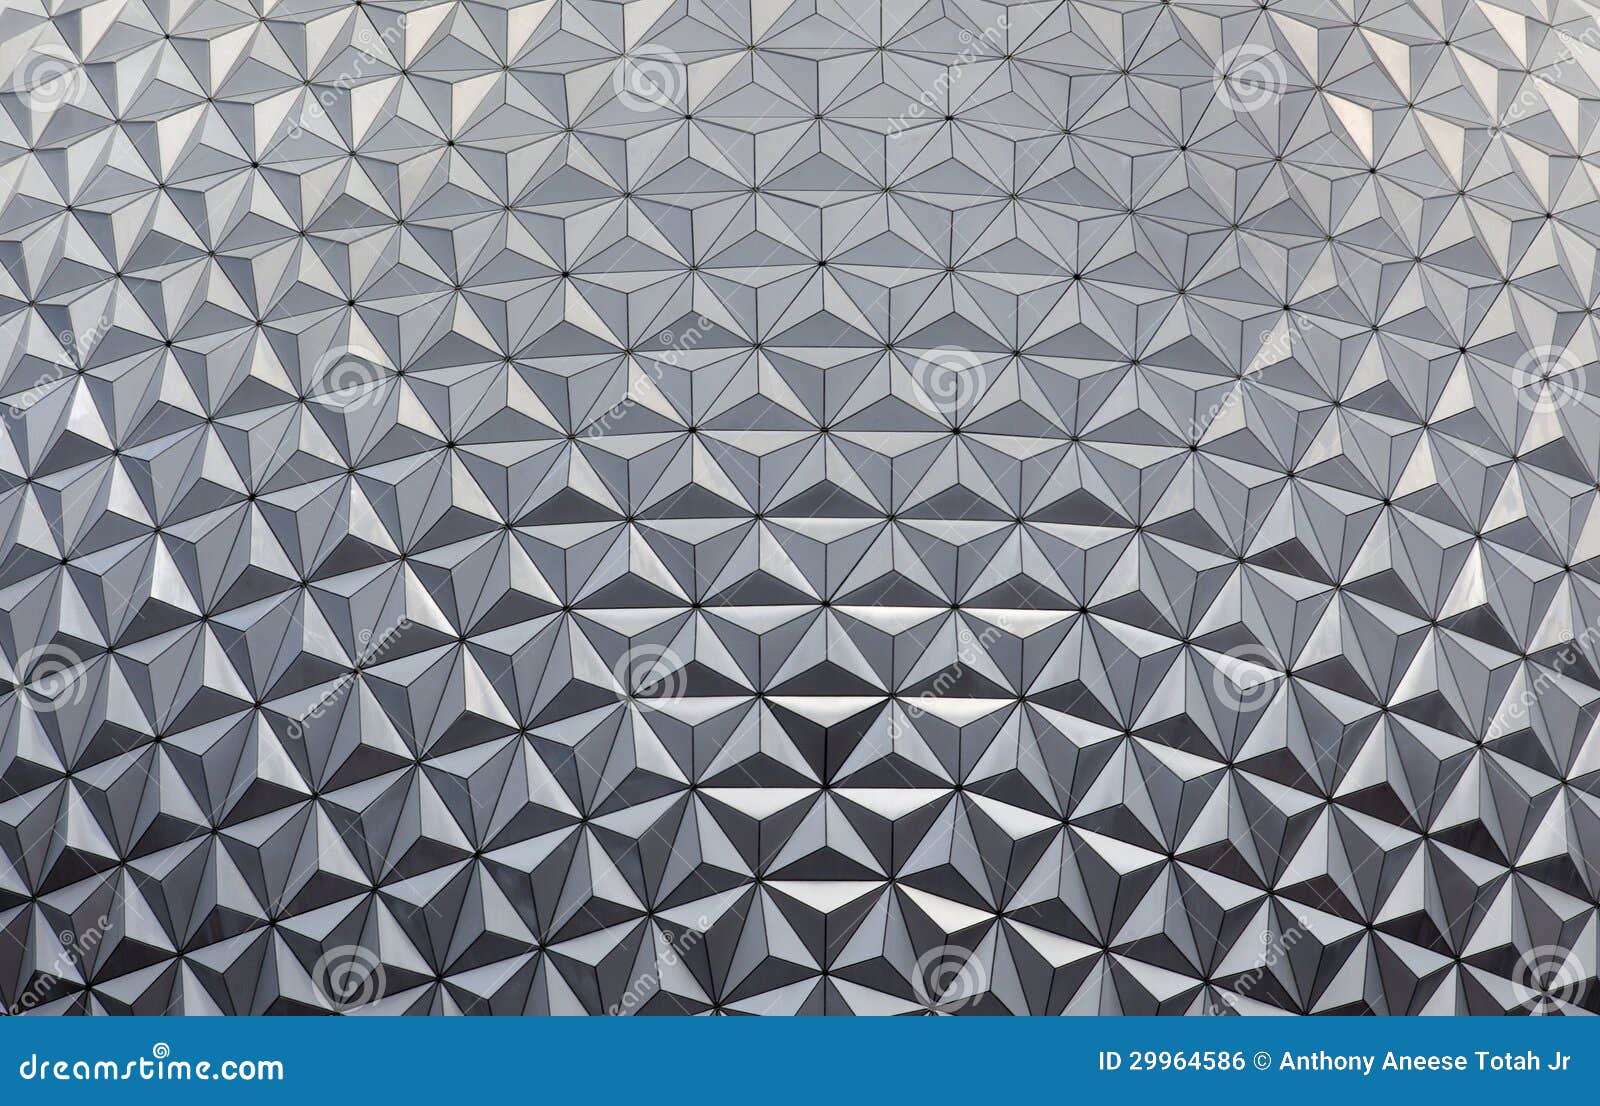 geo dome pattern made from triangle